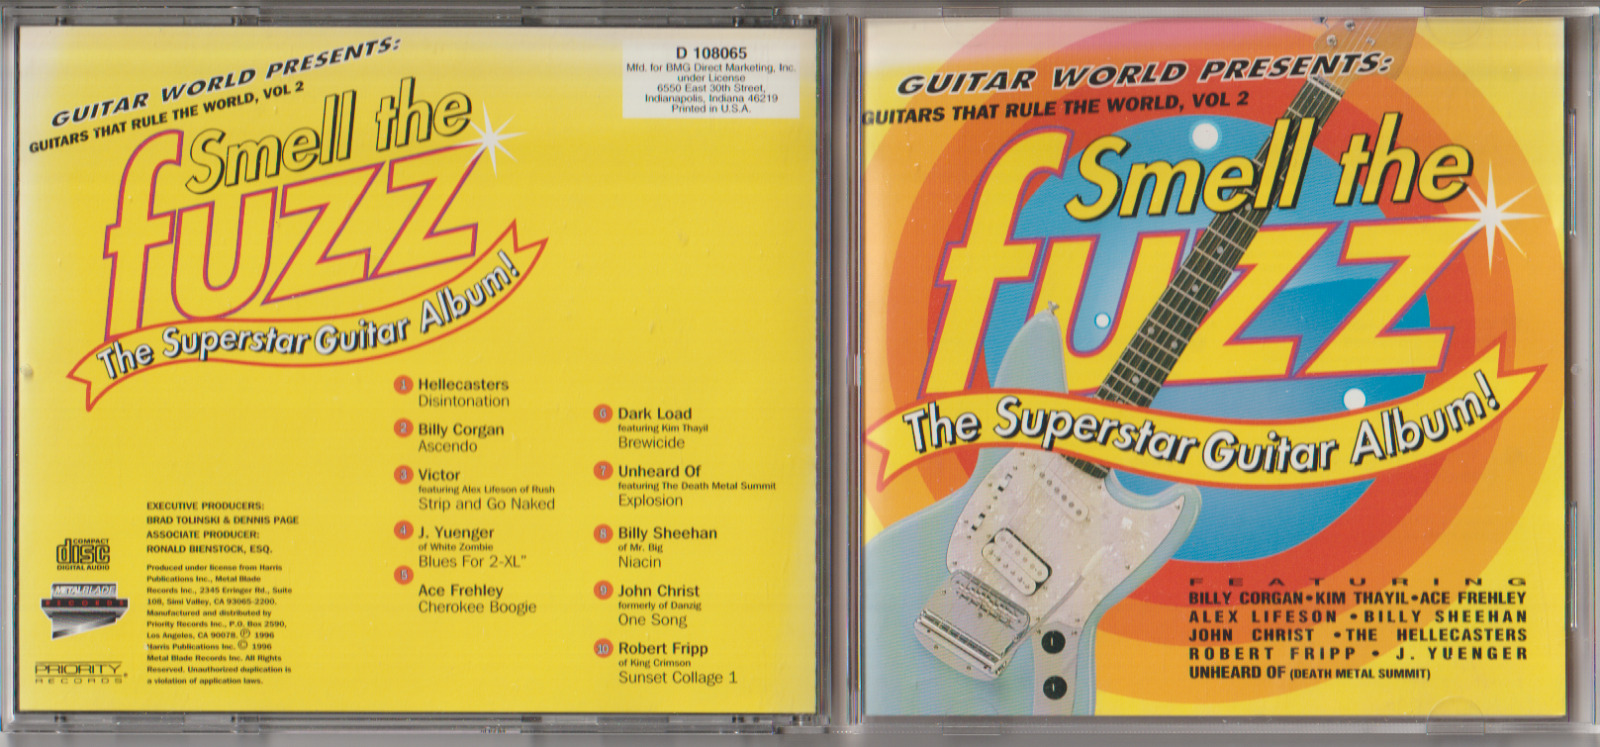 Guitar World Presents Guitars That Rule the World Vol. 2 (unlimited items $4 S&H